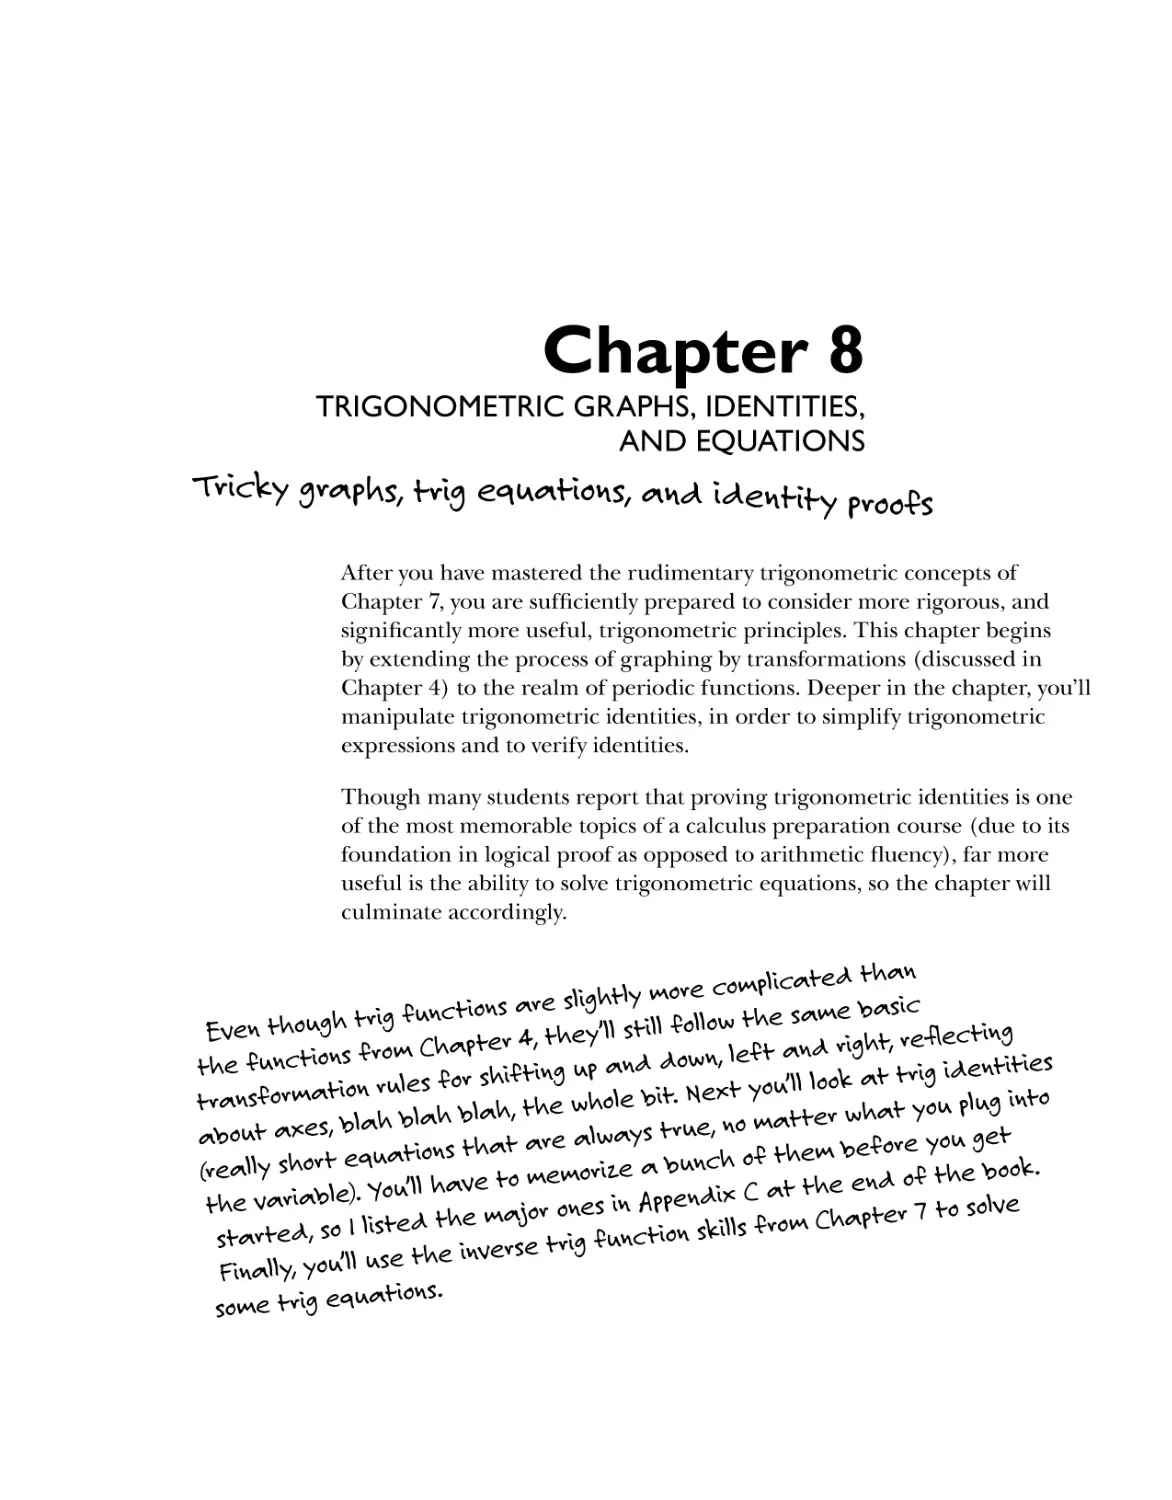 Chapter 8: Trigonometric Graphs, Identities, and Equations 105